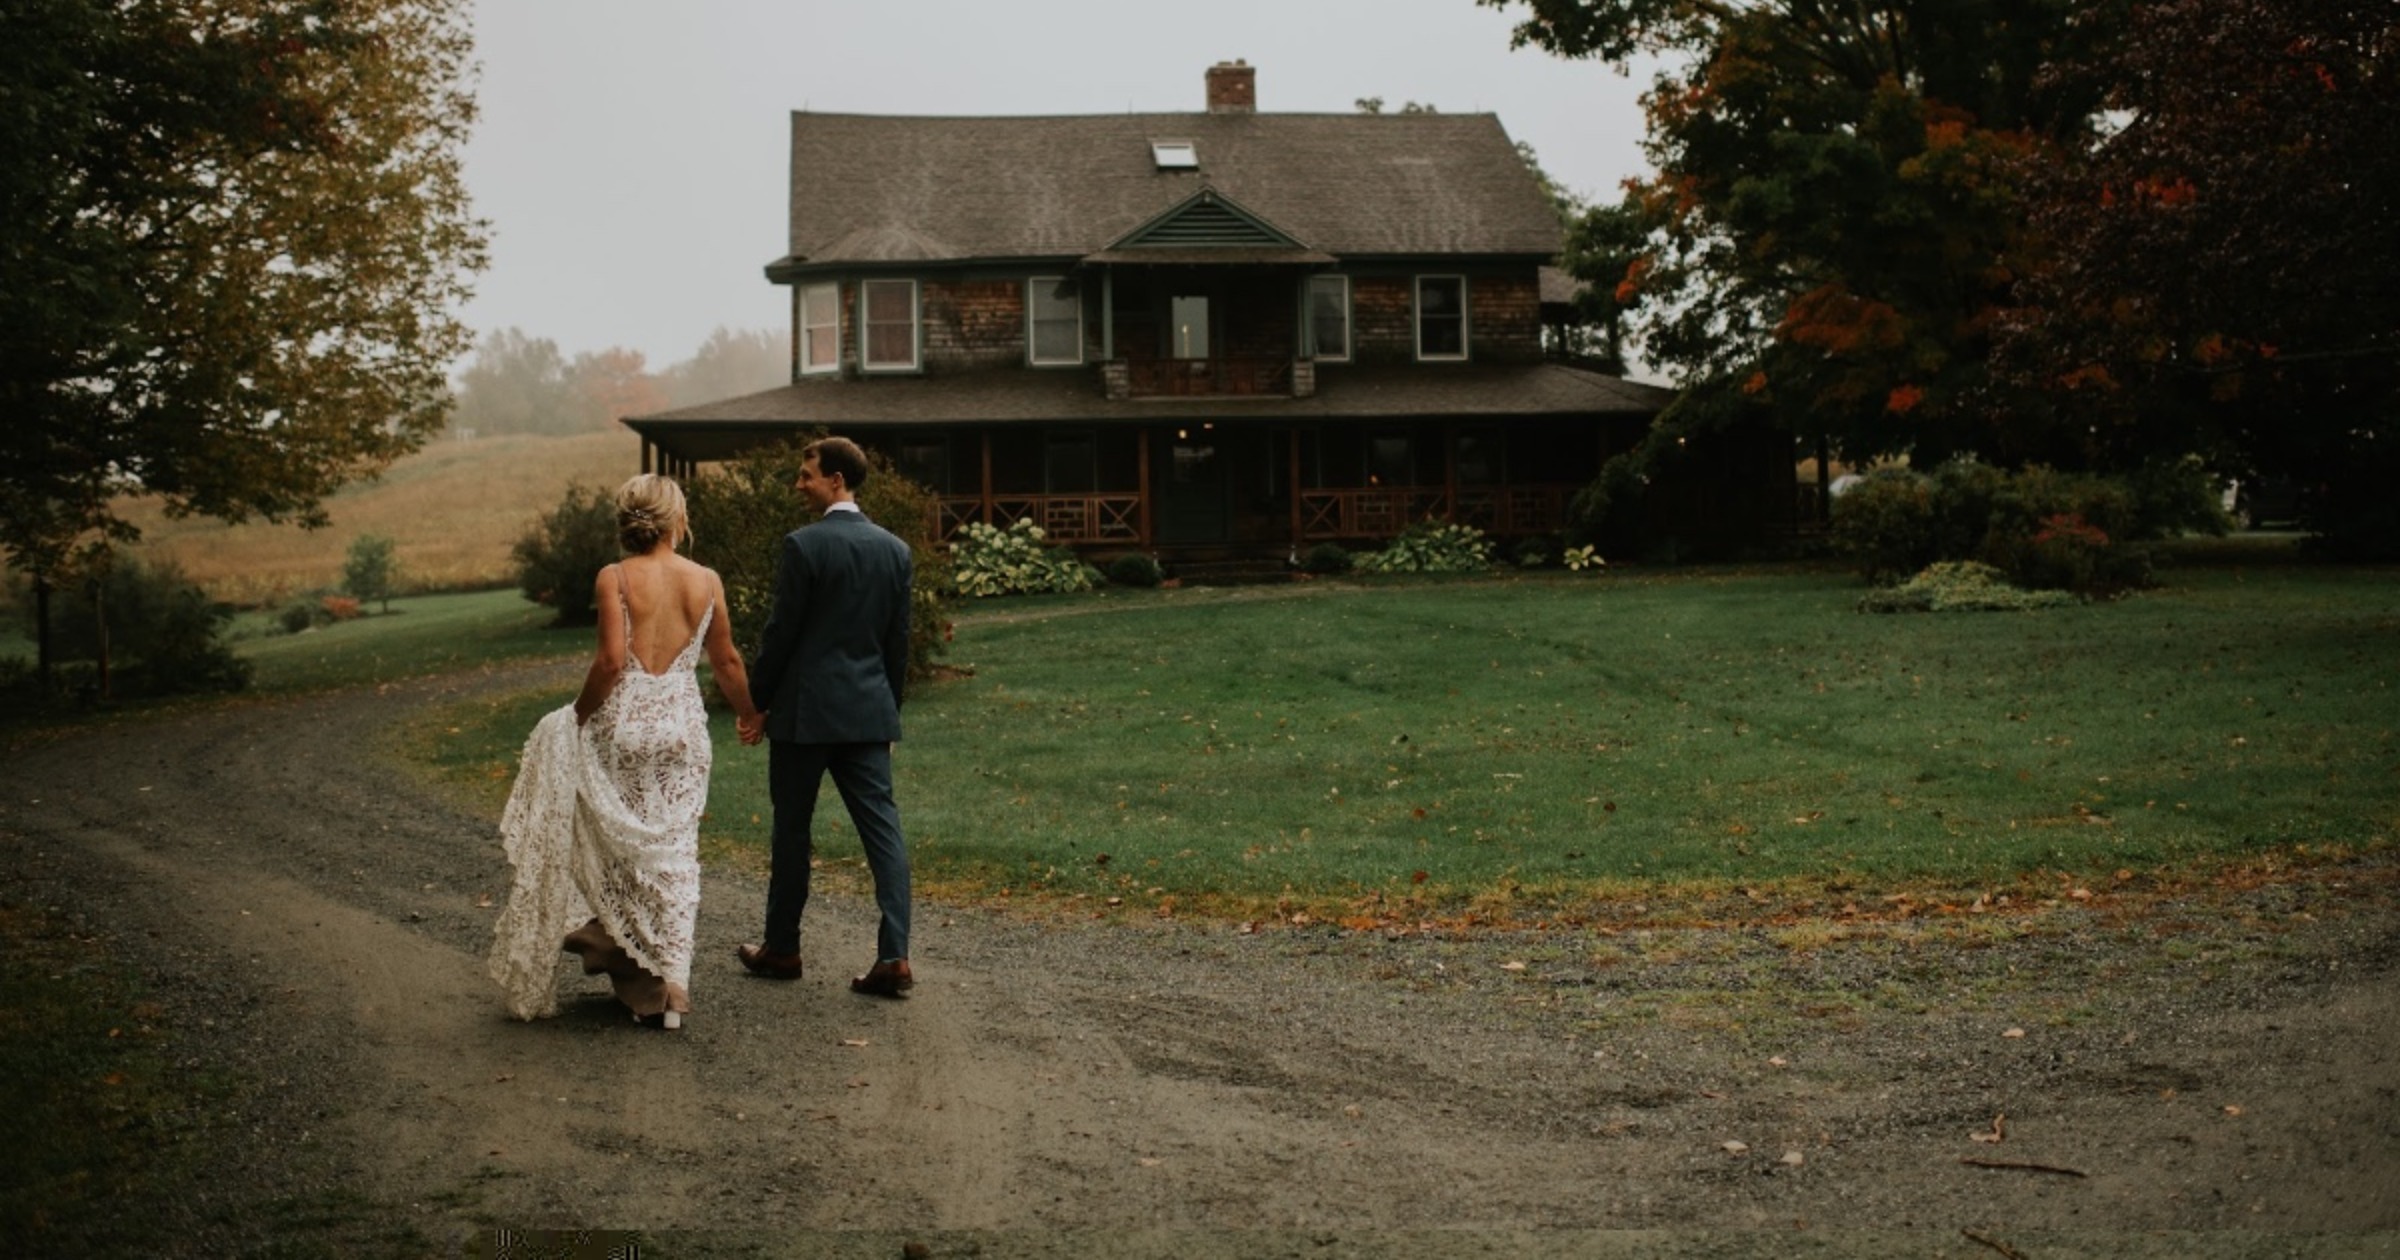 A foggy New Hampshire wedding with a fiddler, family, and friends